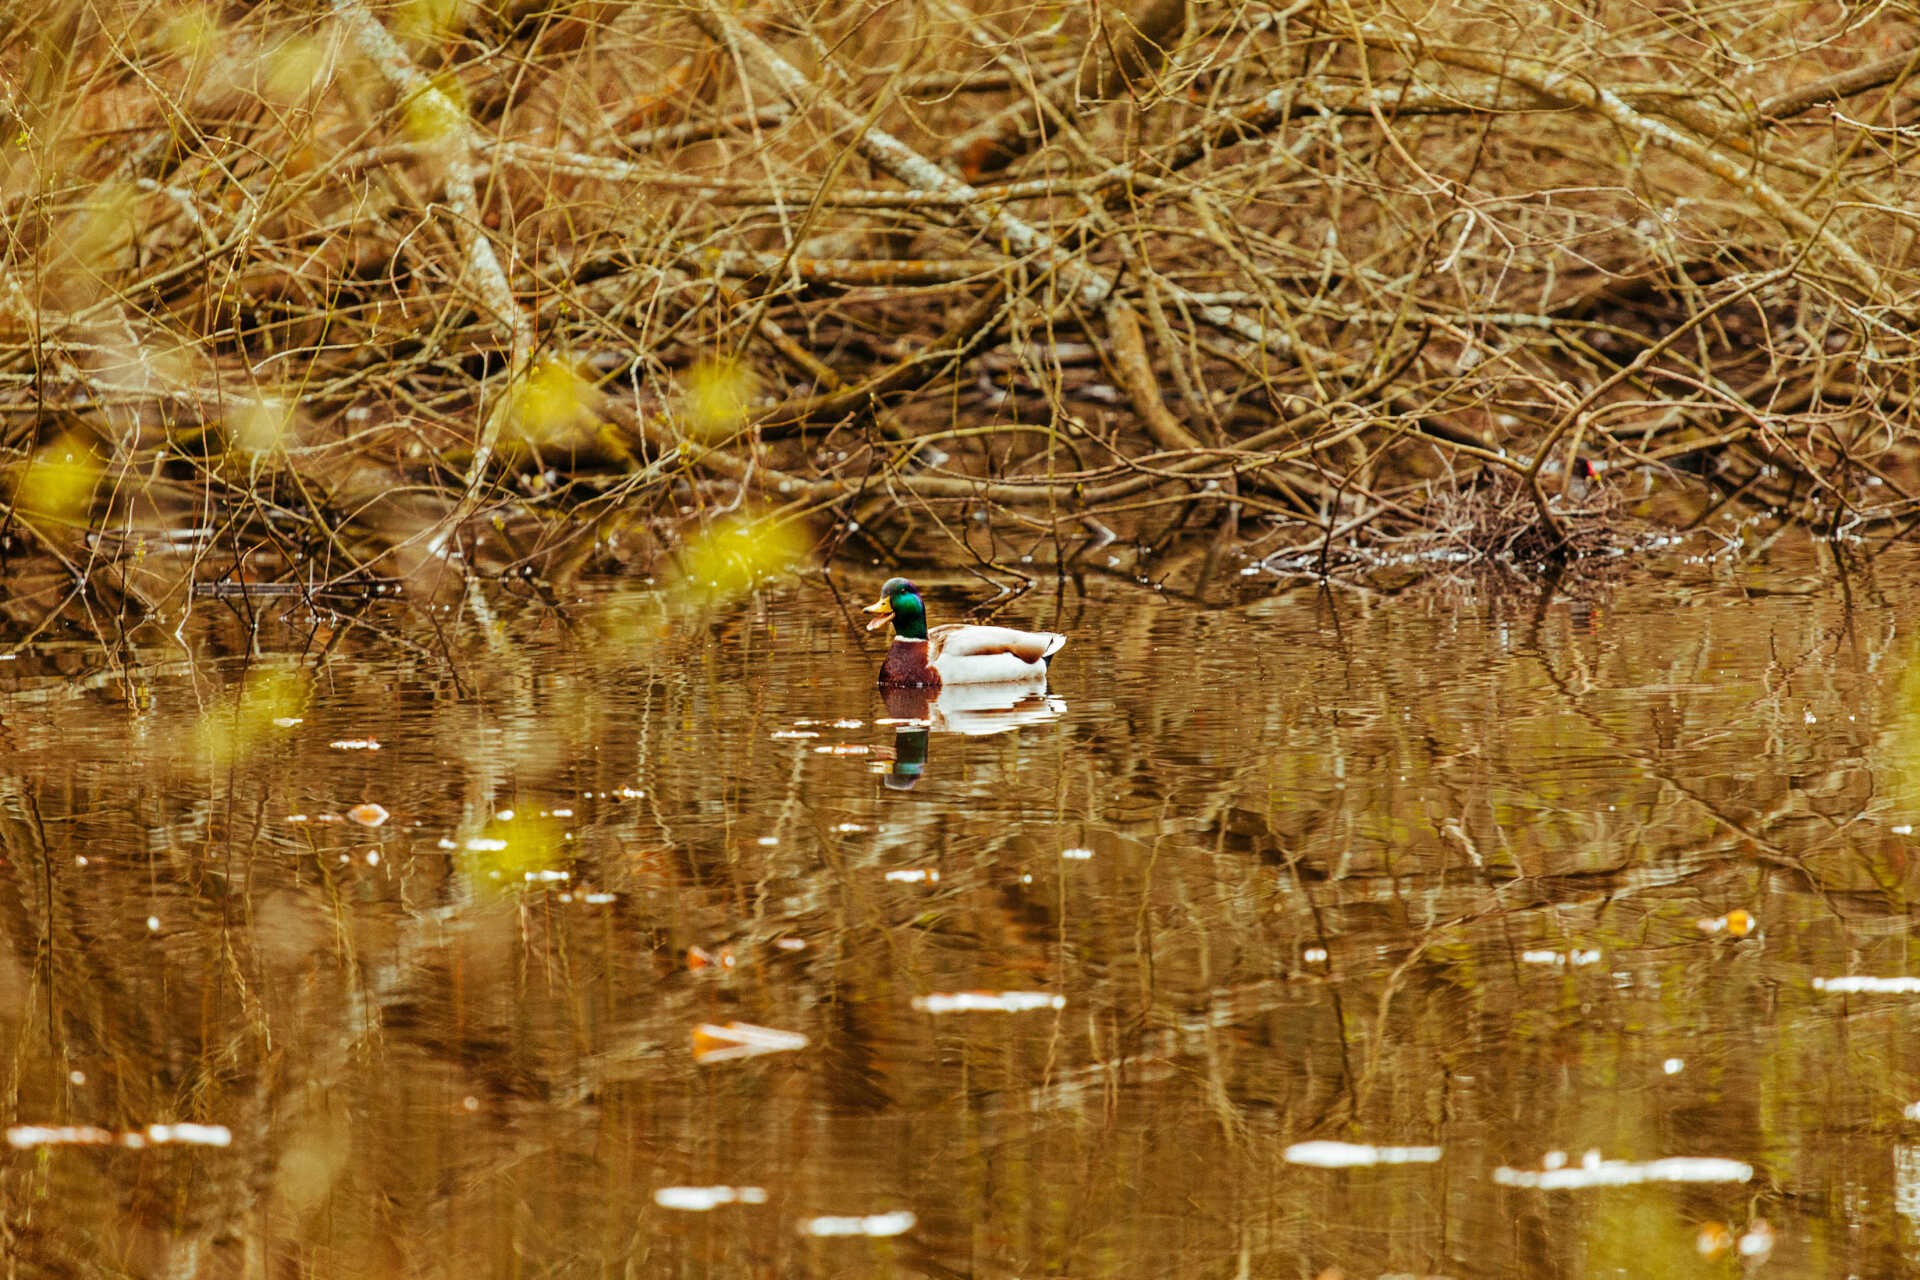 A duck swimming in a pond with trees in the background.